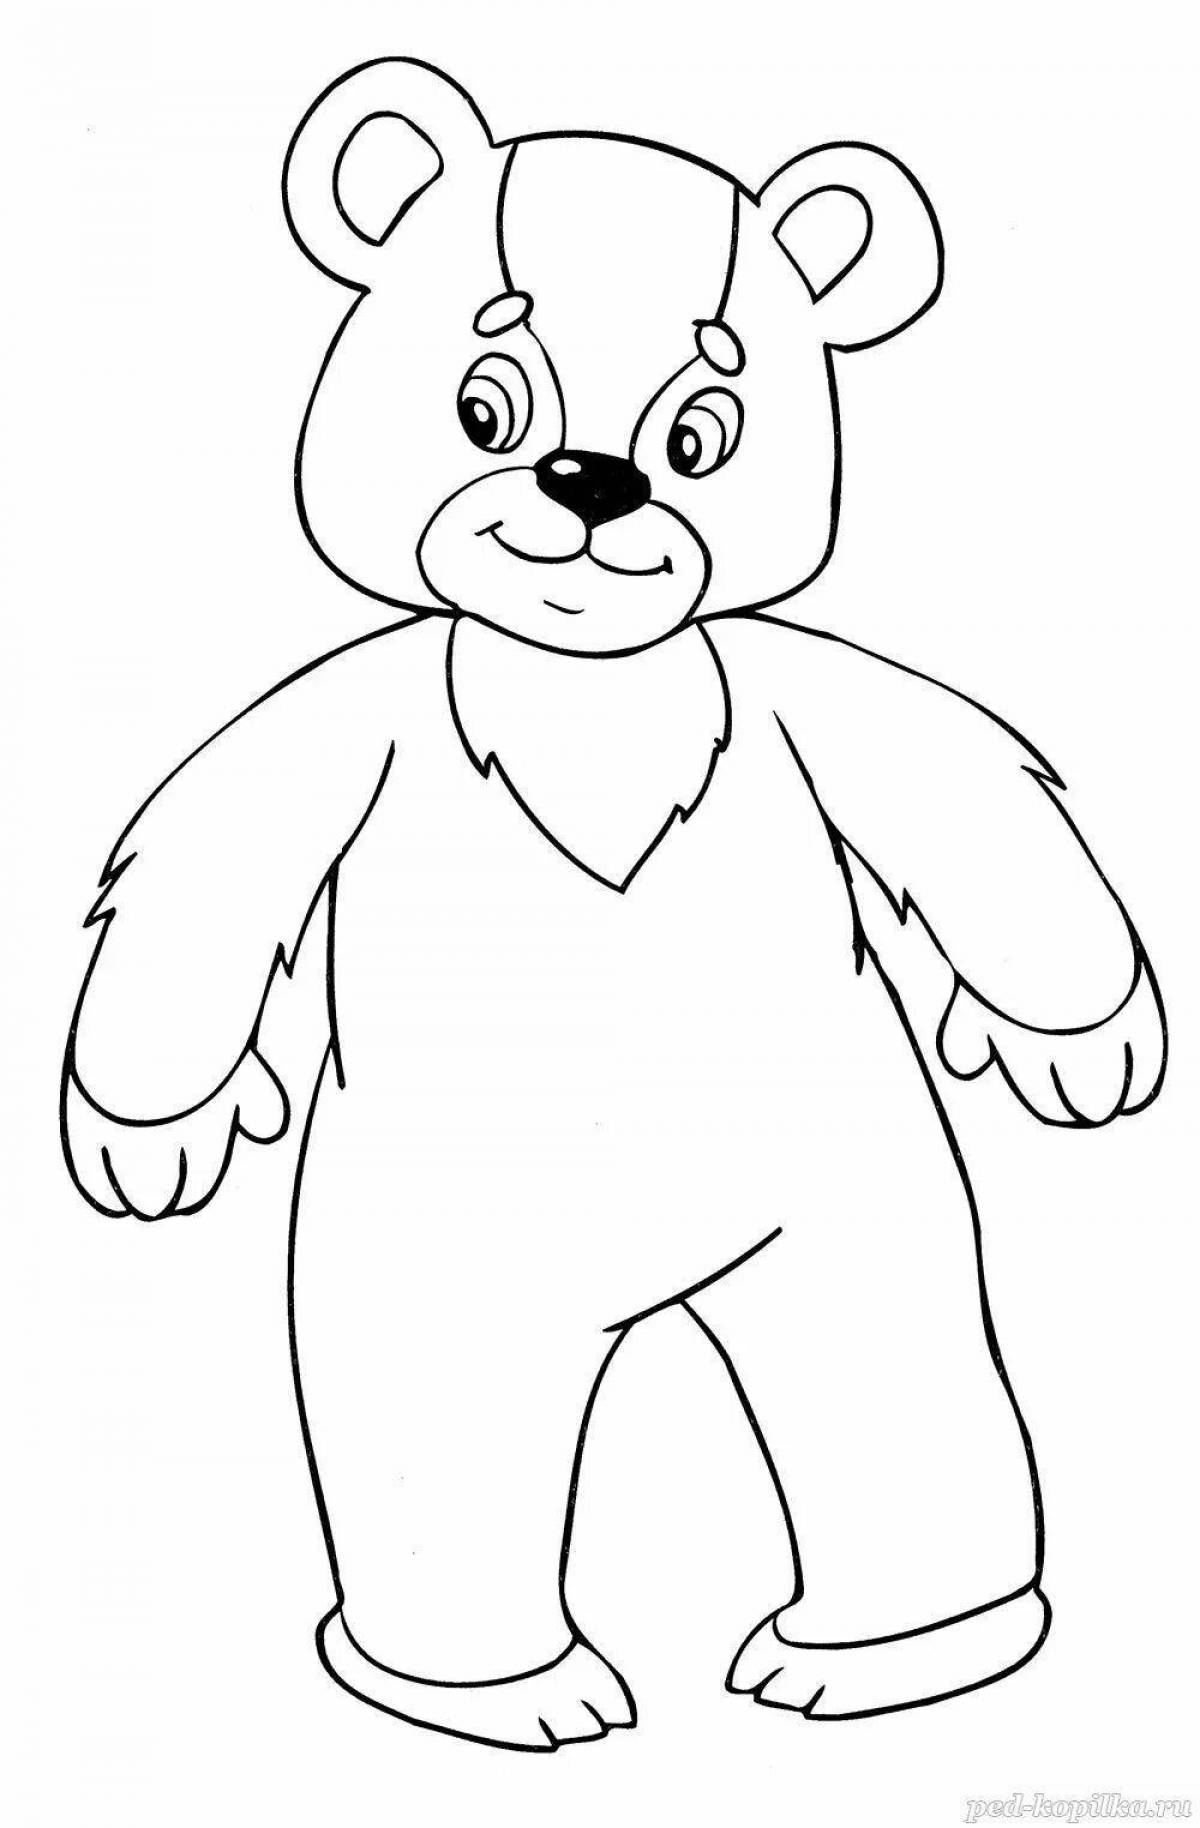 Three bears coloring pages for preschoolers